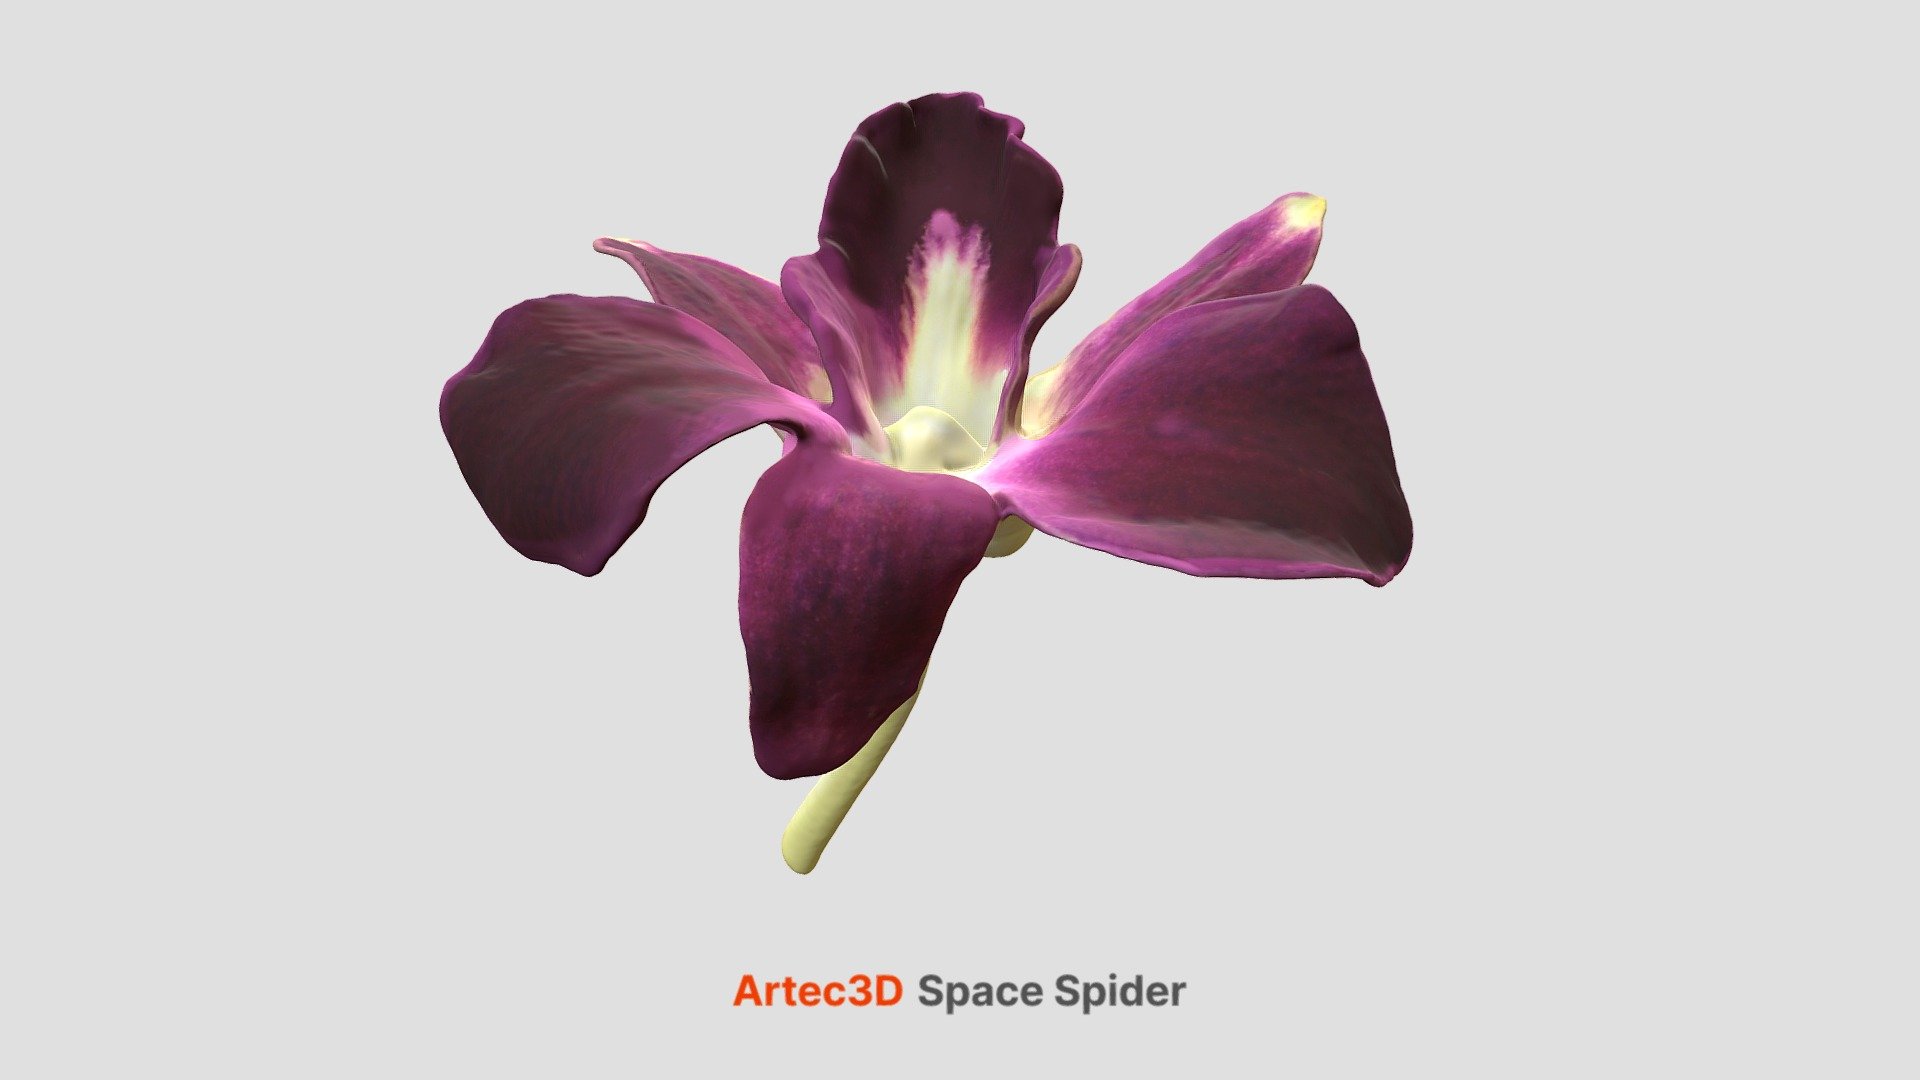 Scanning this flower with Artec Space Spider was fairly easy - one just needed to be mindful of perspective change in geometry of the petals once the object was turned over. ou can download this model from our website https://www.artec3d.com/3d-models/flower
Scanning time: 2 min
Processing time: 6 min - Flower - 3D model by Artec 3D 3d model